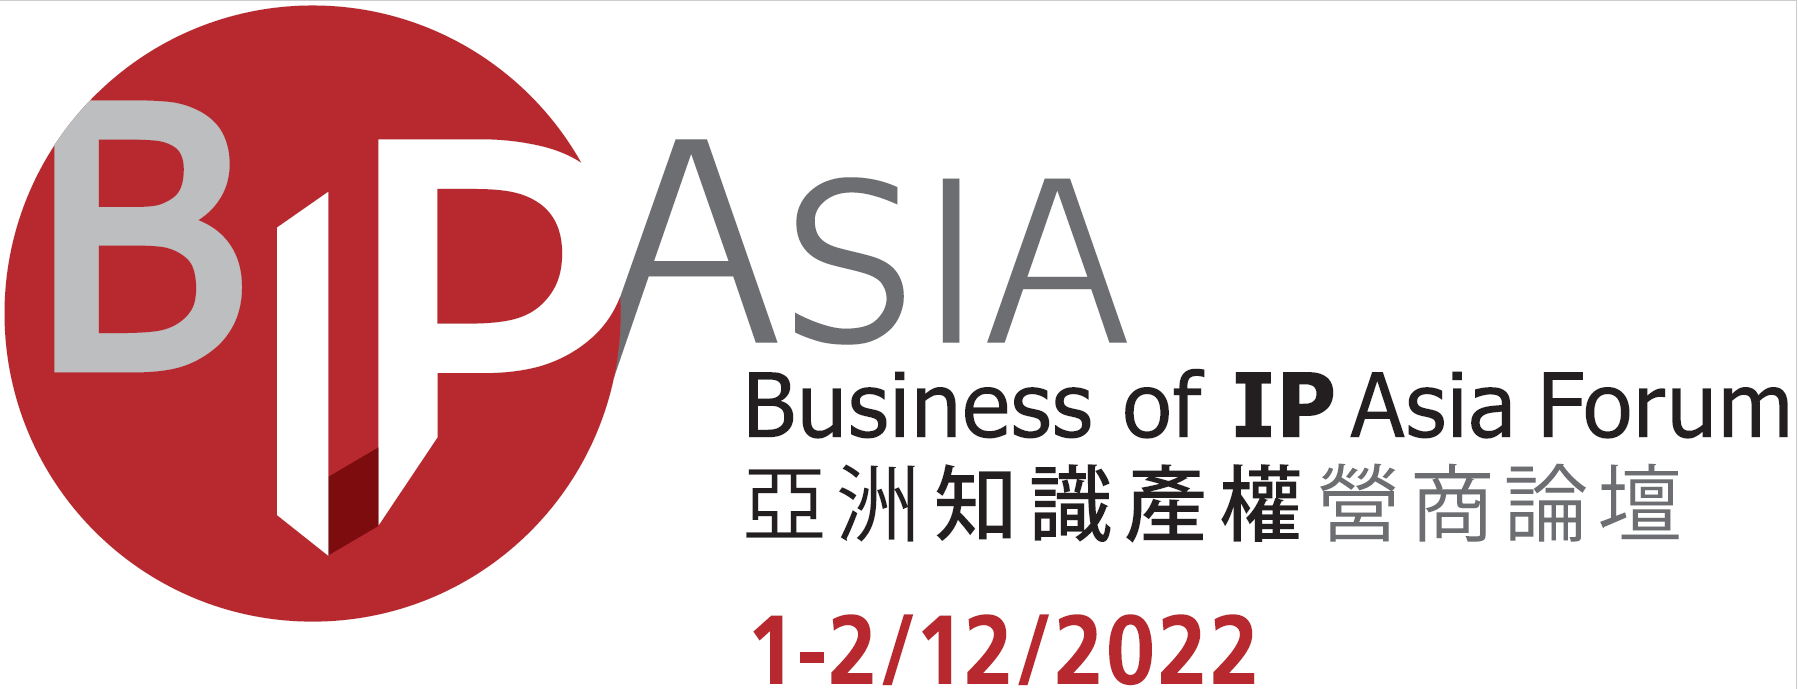 Business of Intellectual Property Asia Forum (BIP Asia Forum) image